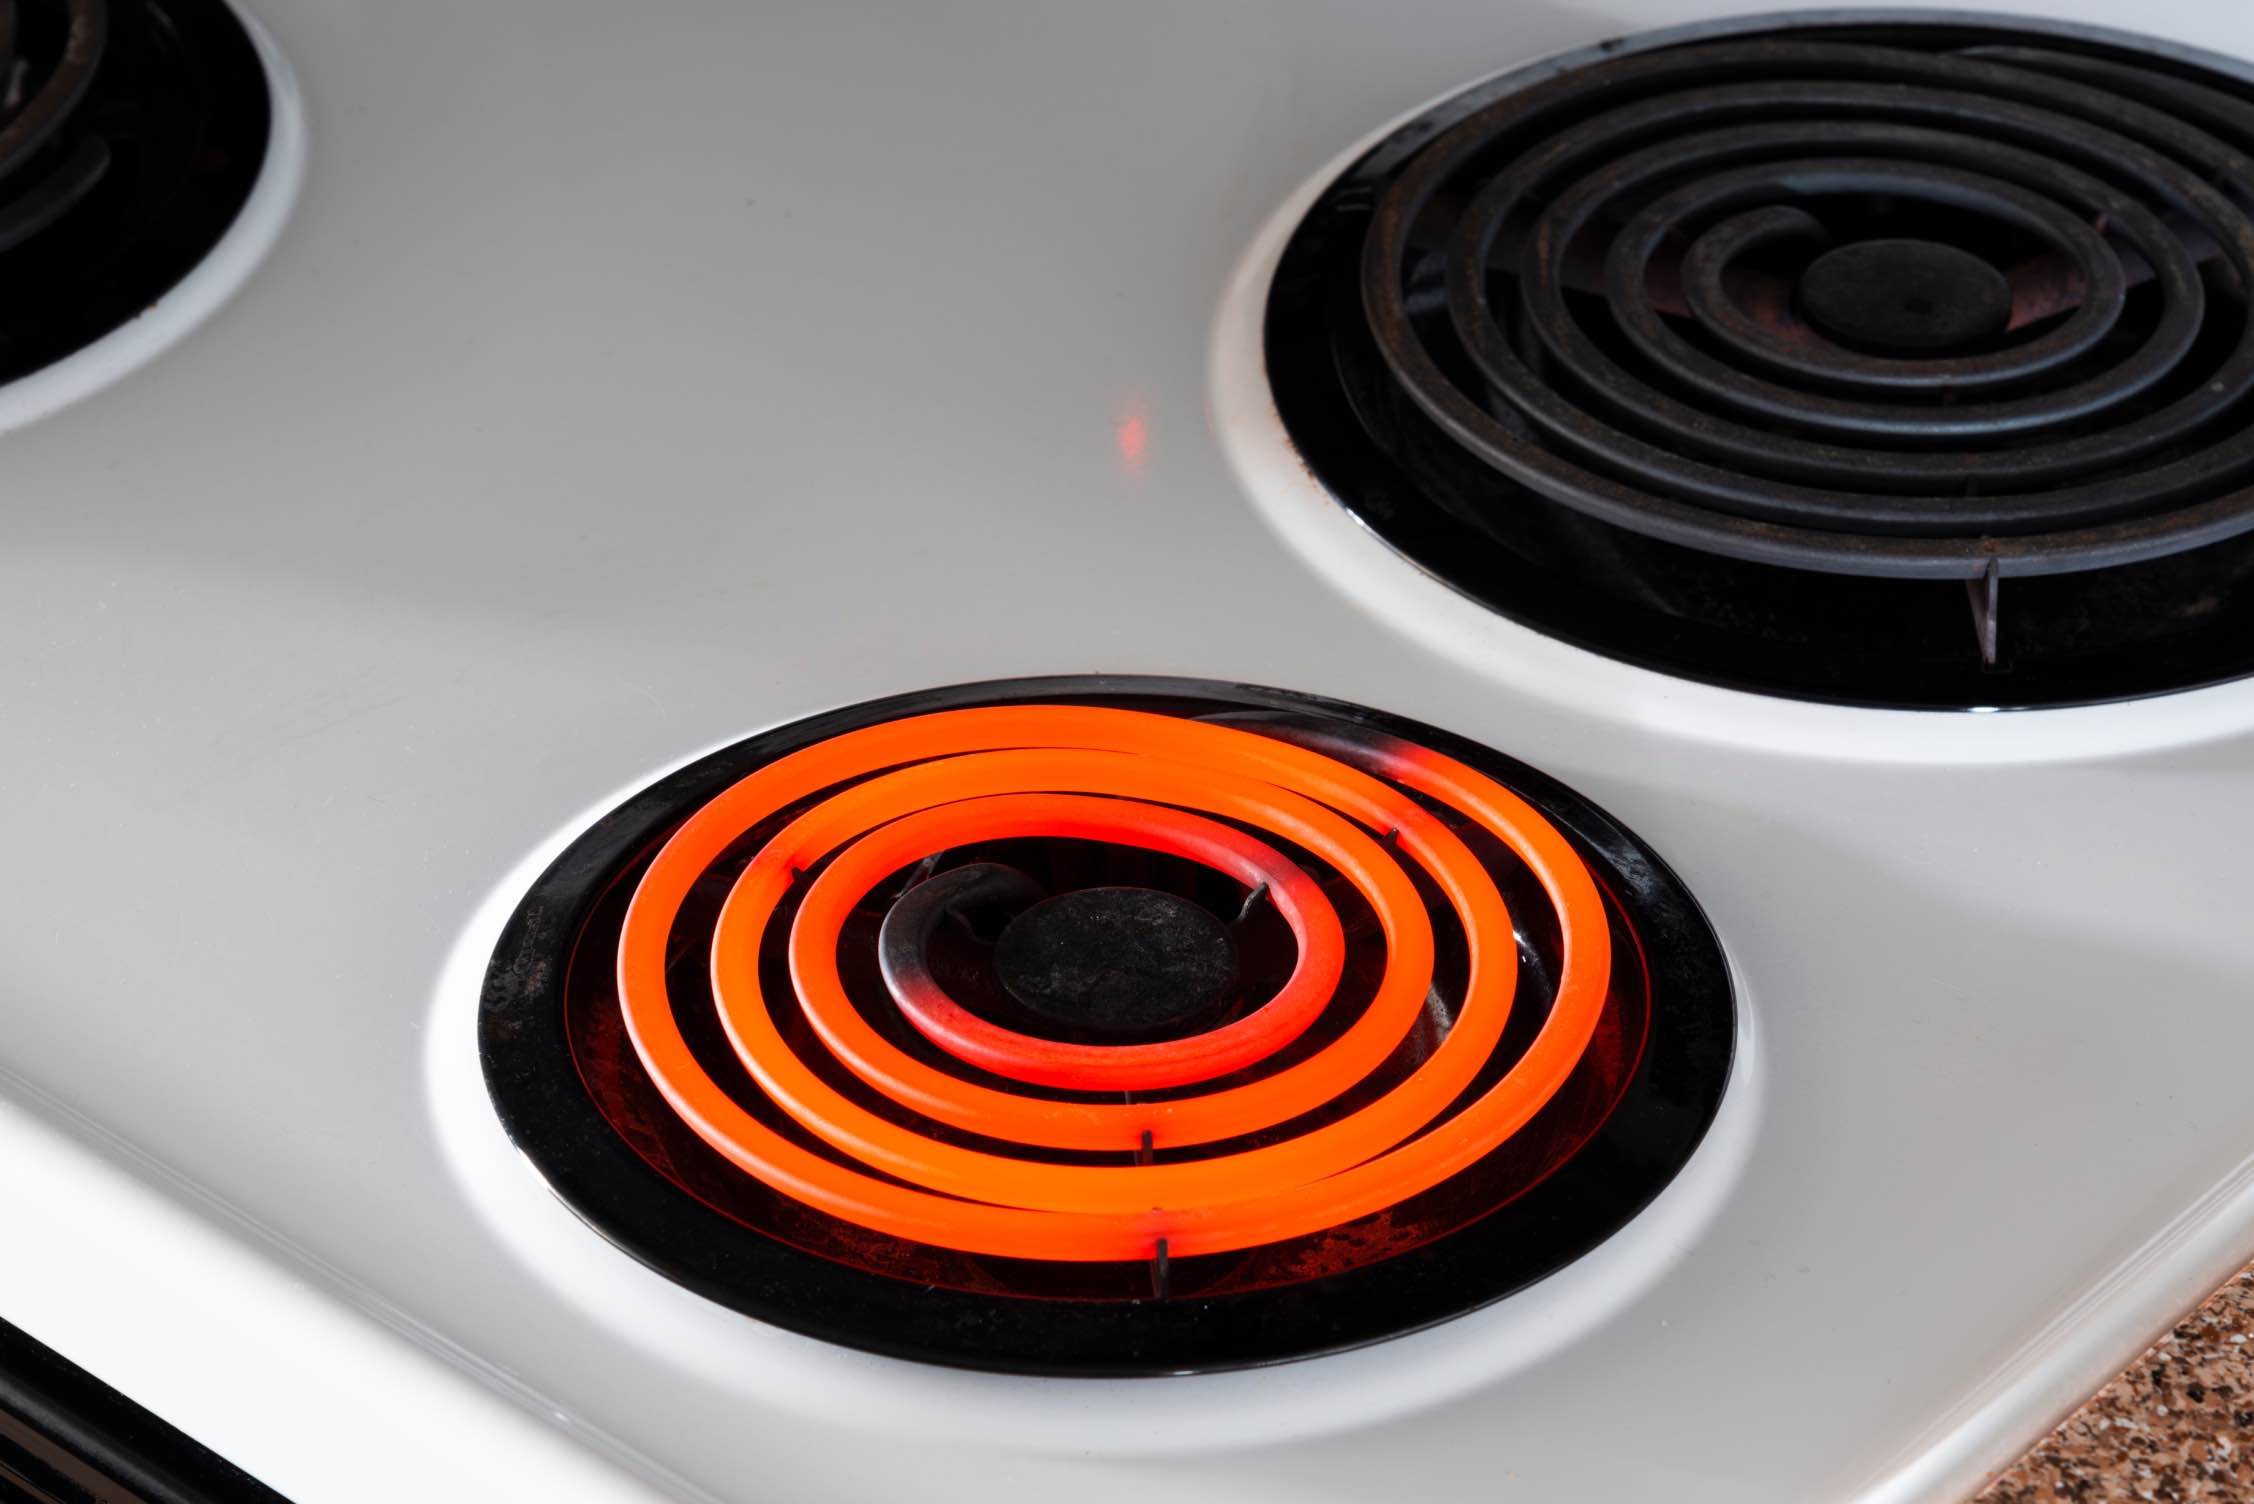 Electric Stove Not Working? Try These Troubleshooting Tips